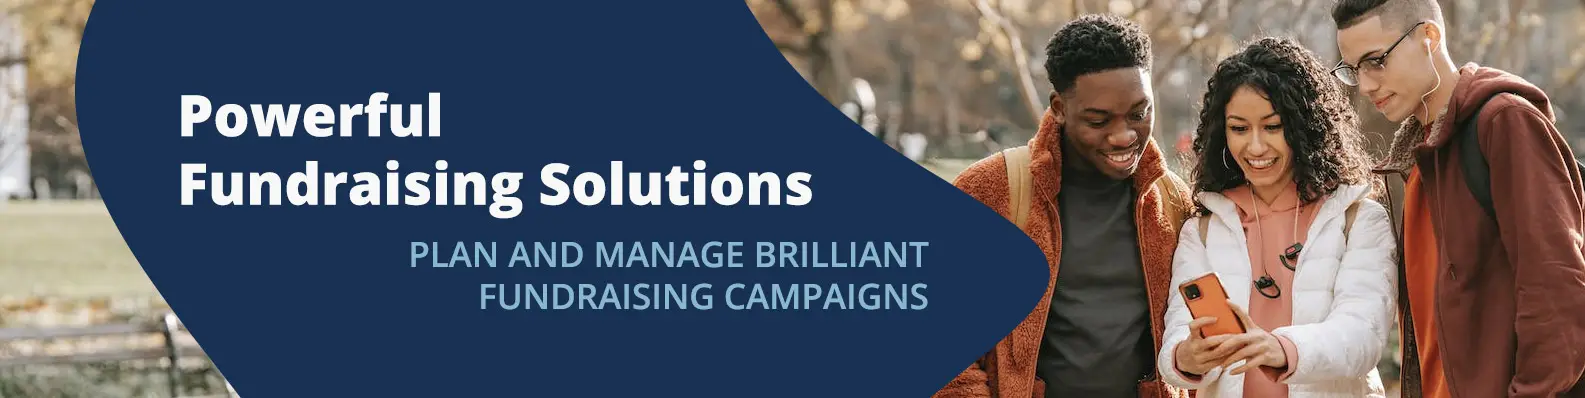 Powerful Fundraising Solutions